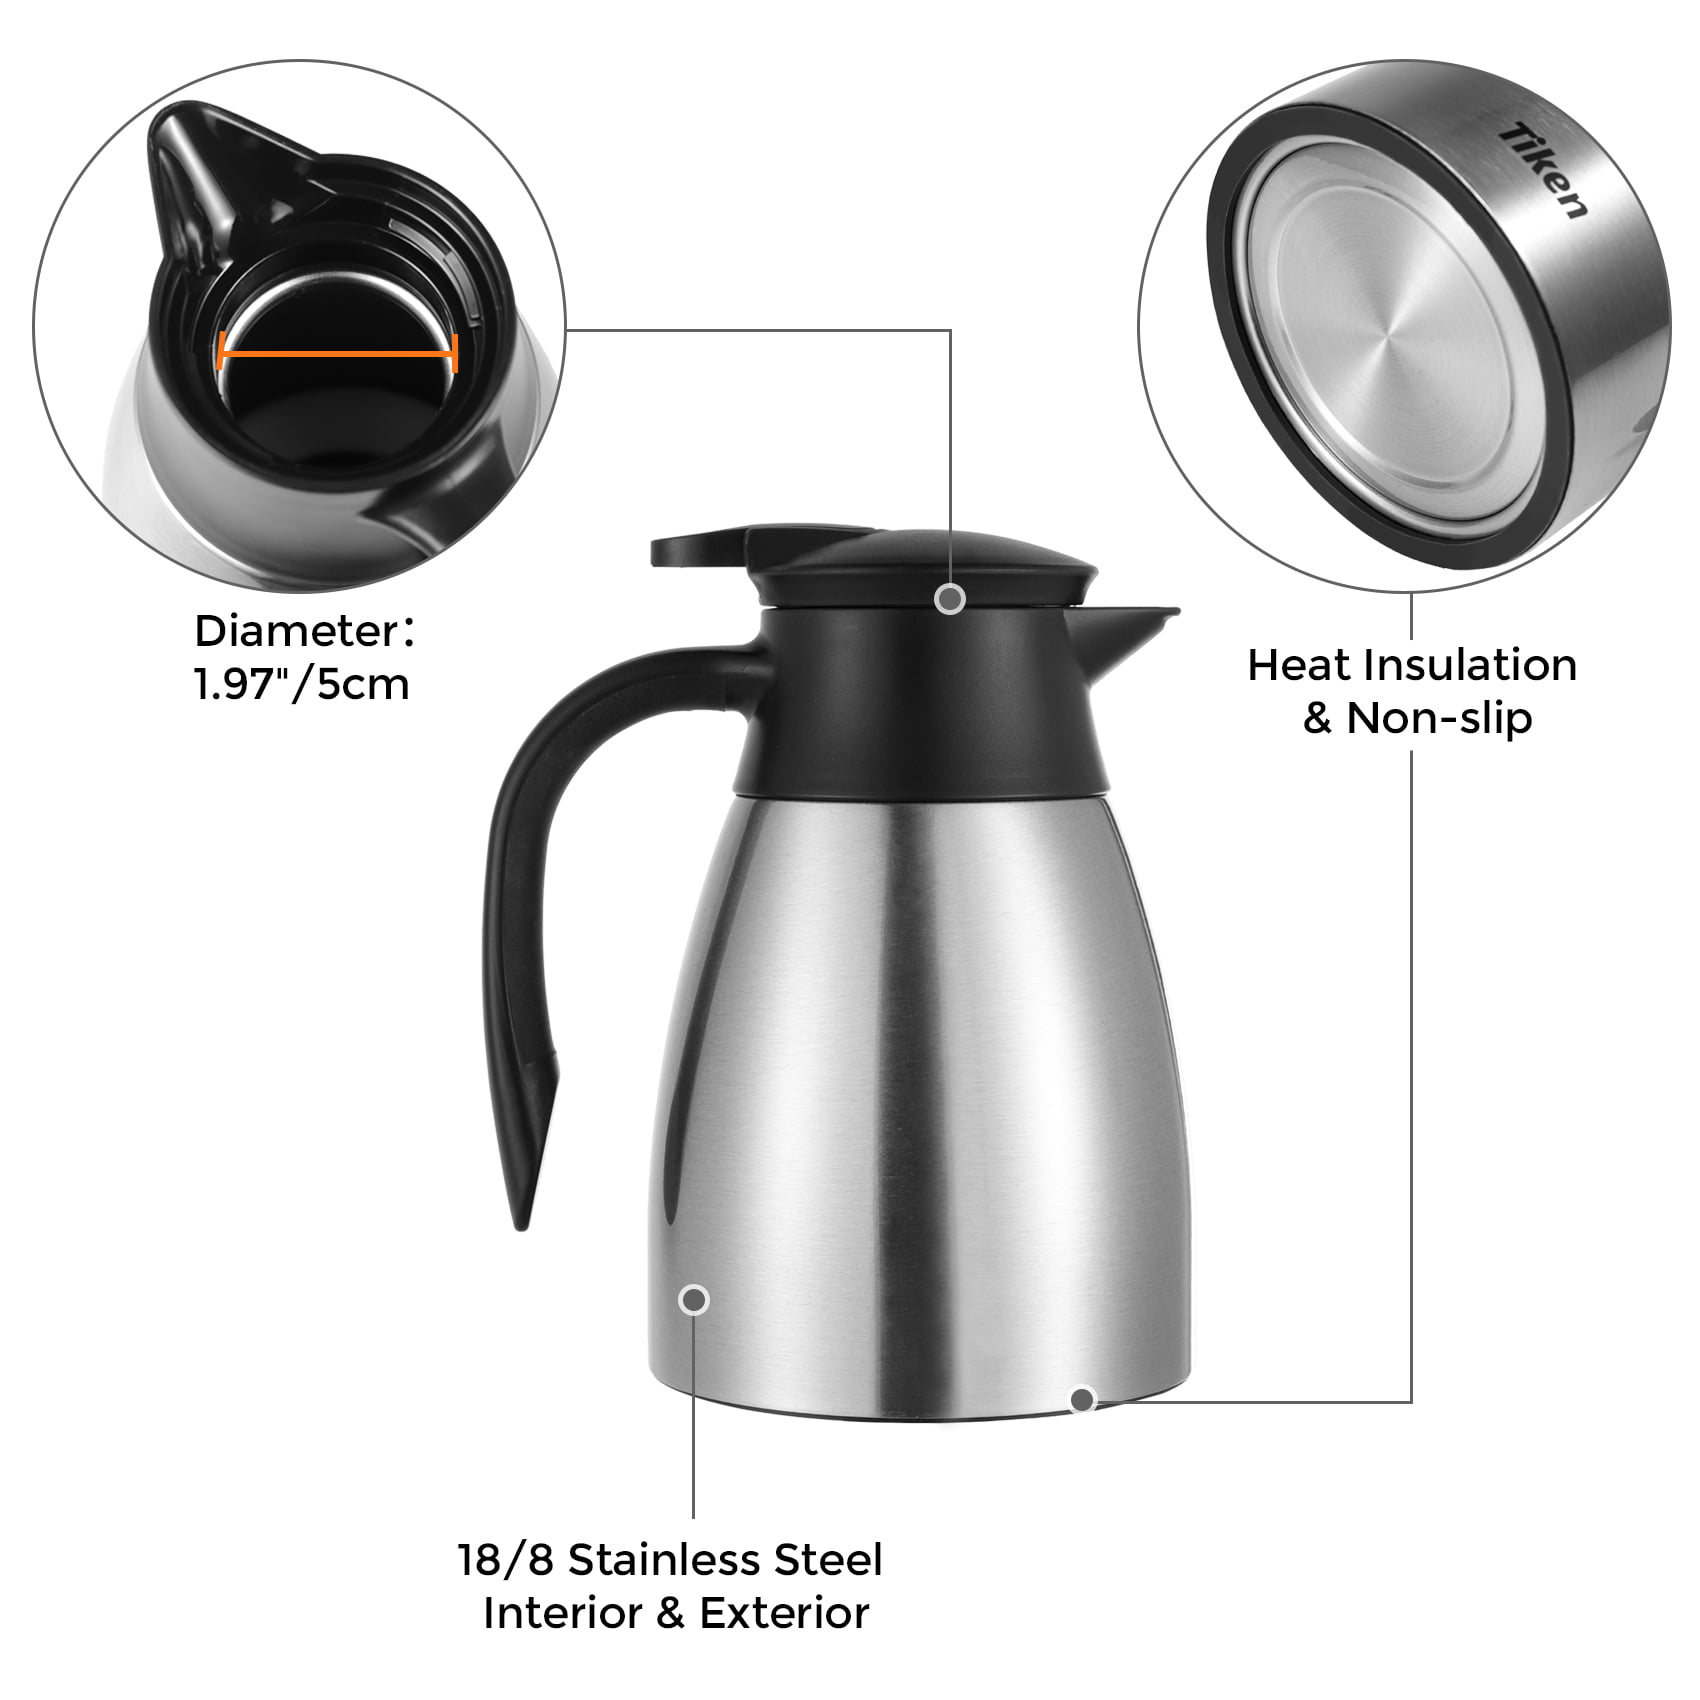  GiNT 1L / 34Oz Thermal Coffee Carafe, Insulated